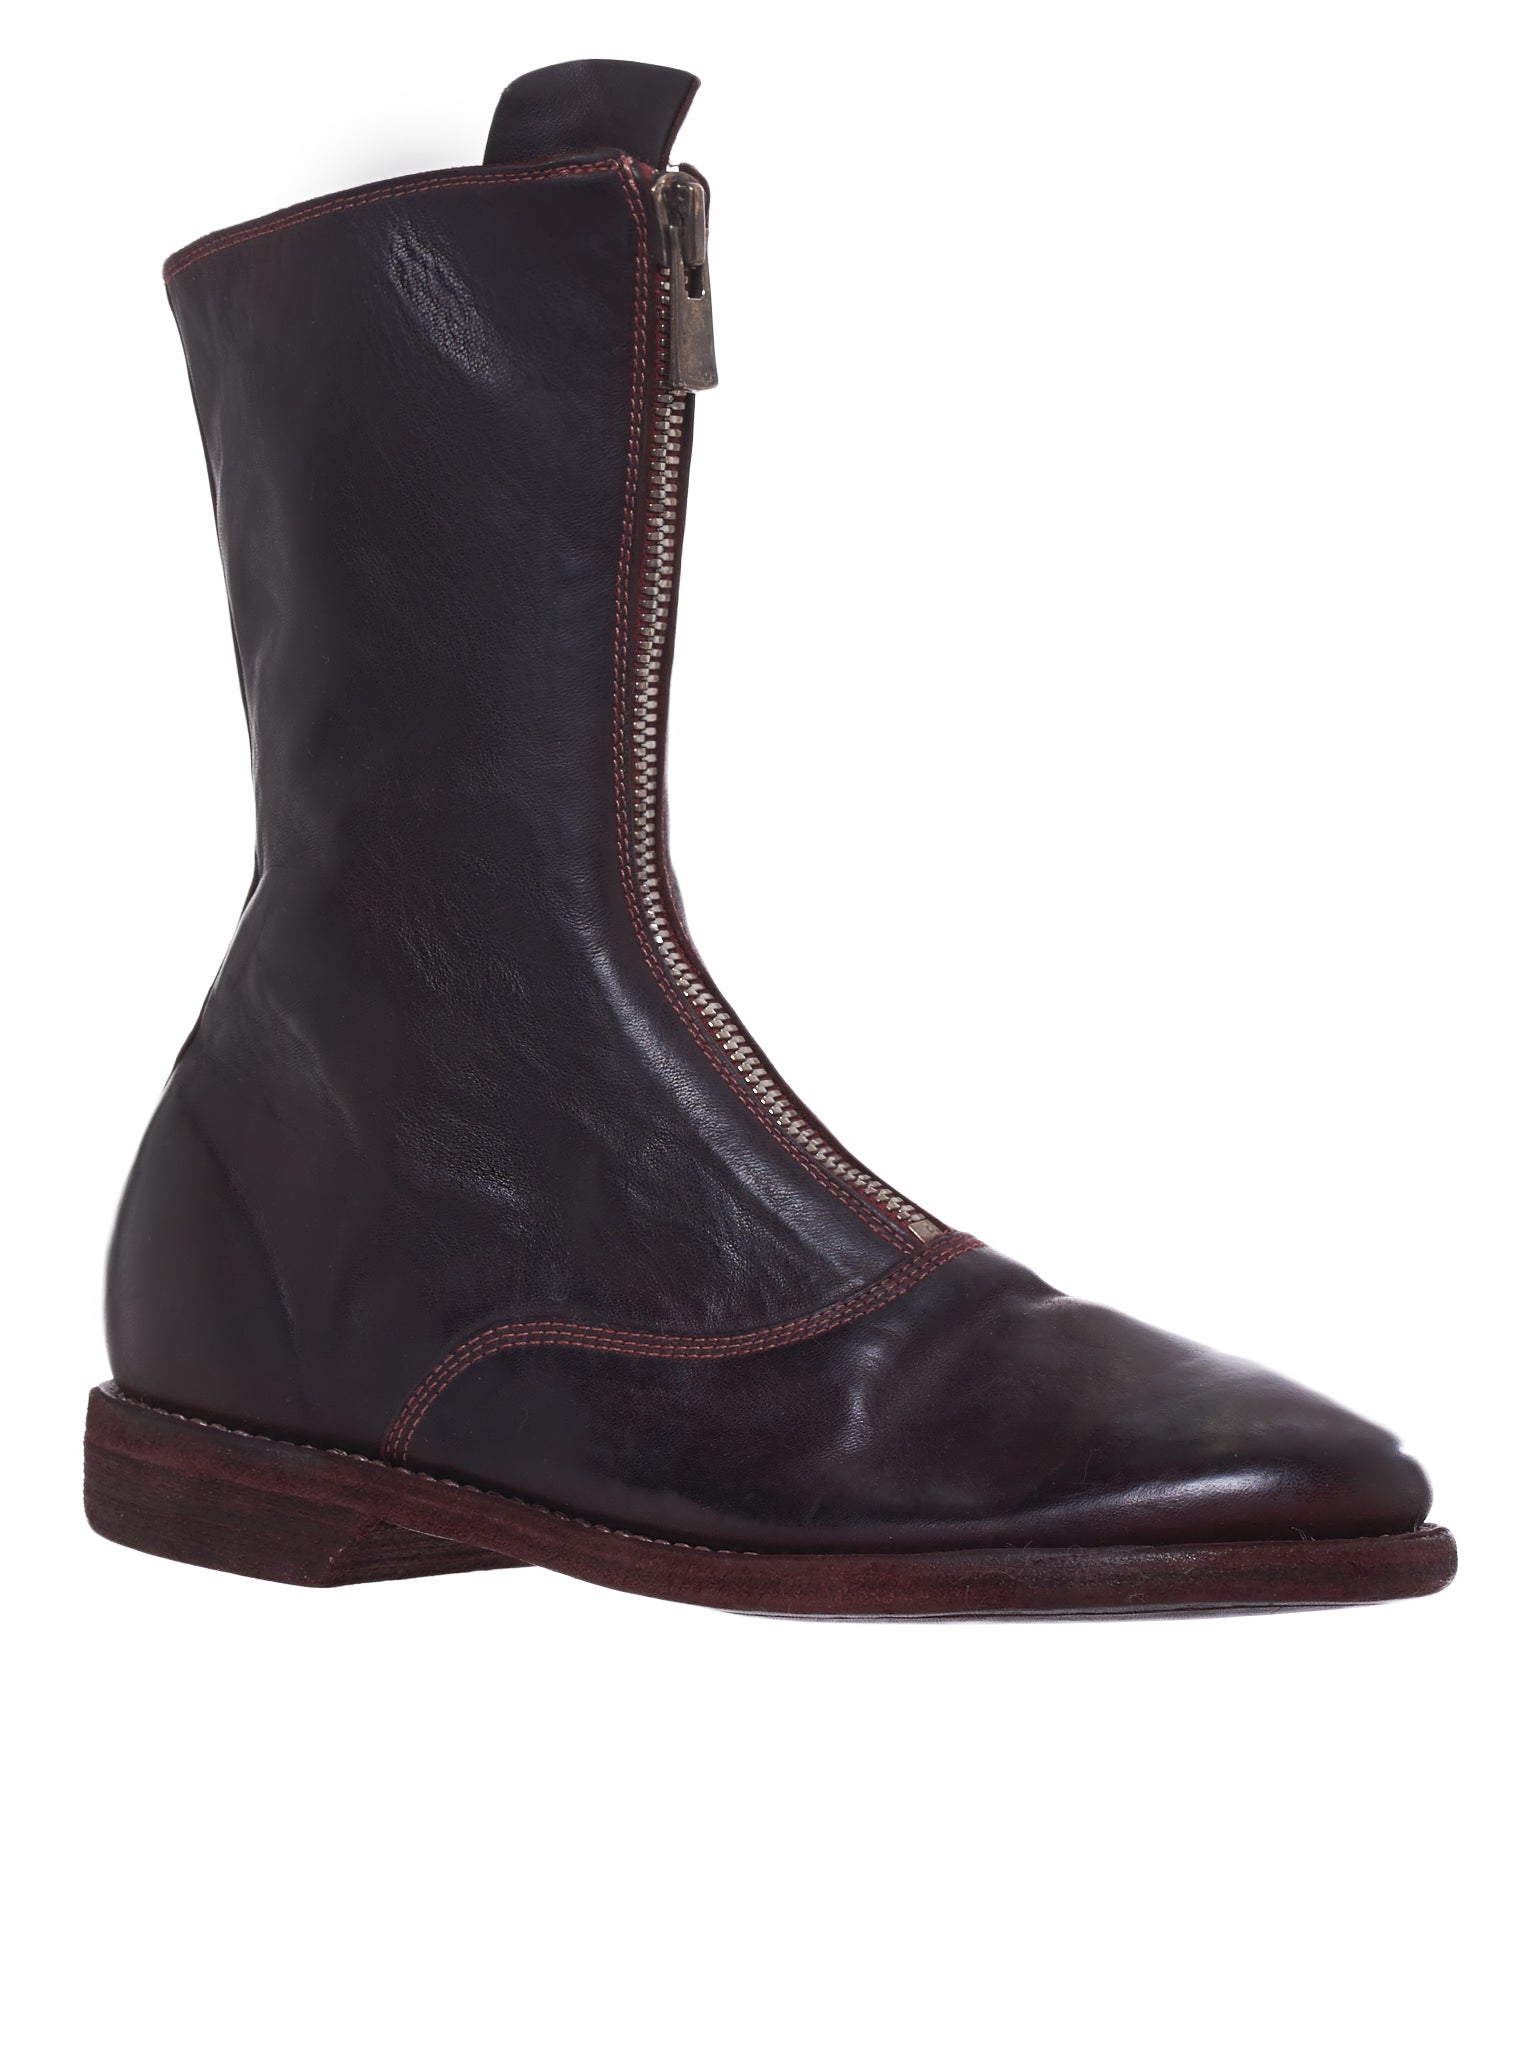 310 Soft Horse Leather Boots (310-SOFT-HORSE-FG-CV23T)